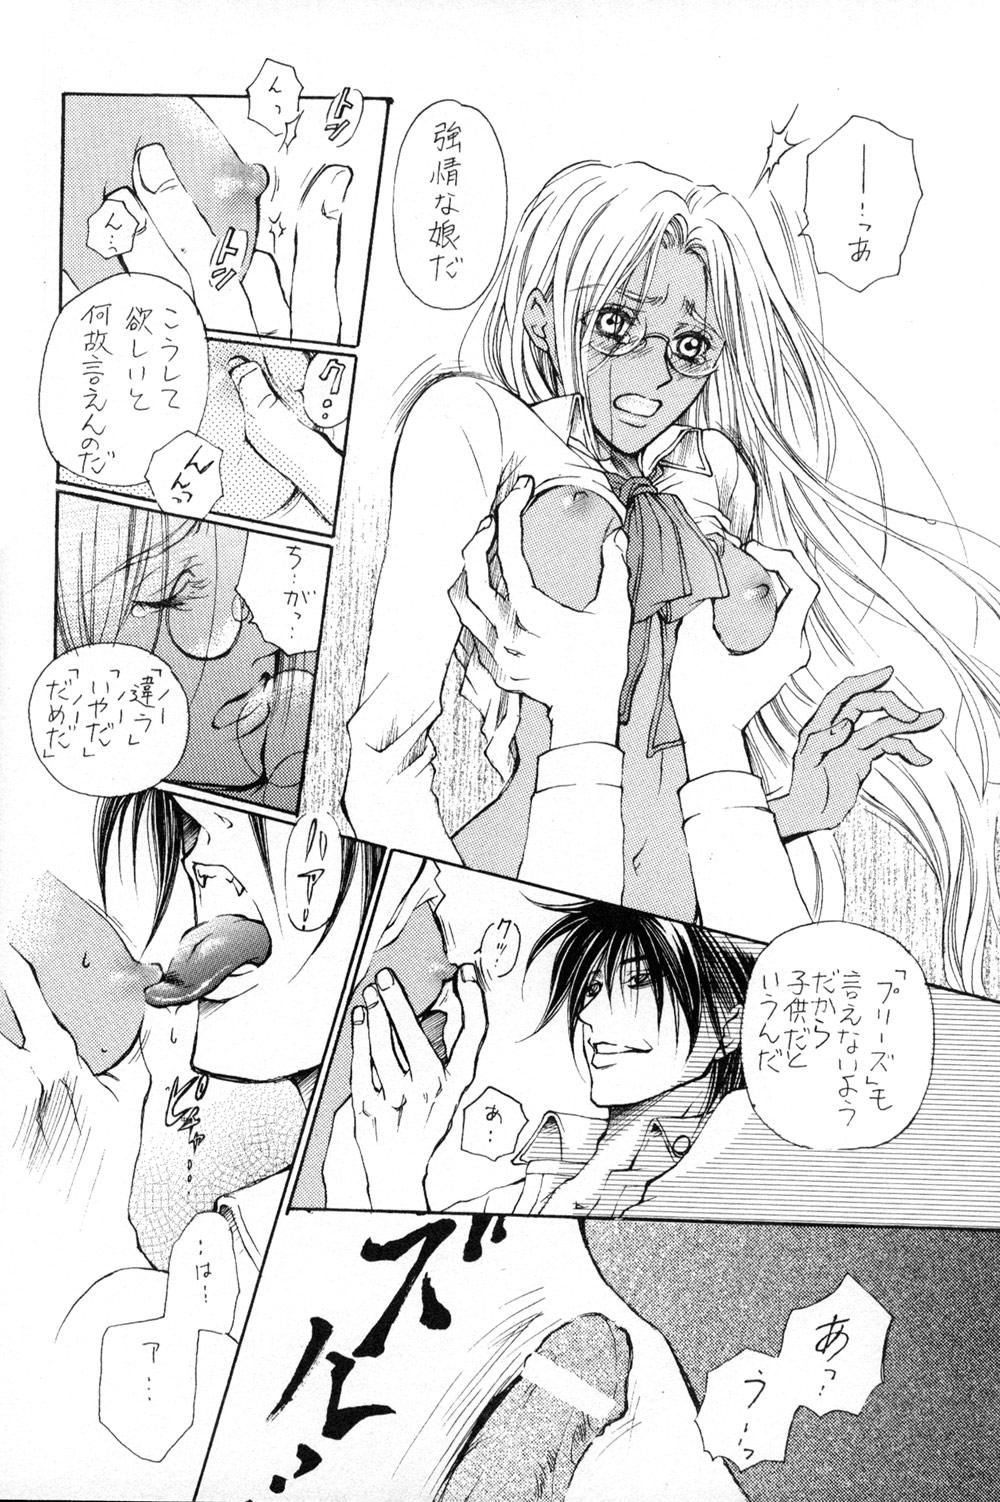 Fudendo The Long Tunnel of Wanting You - Hellsing Missionary Position Porn - Page 10